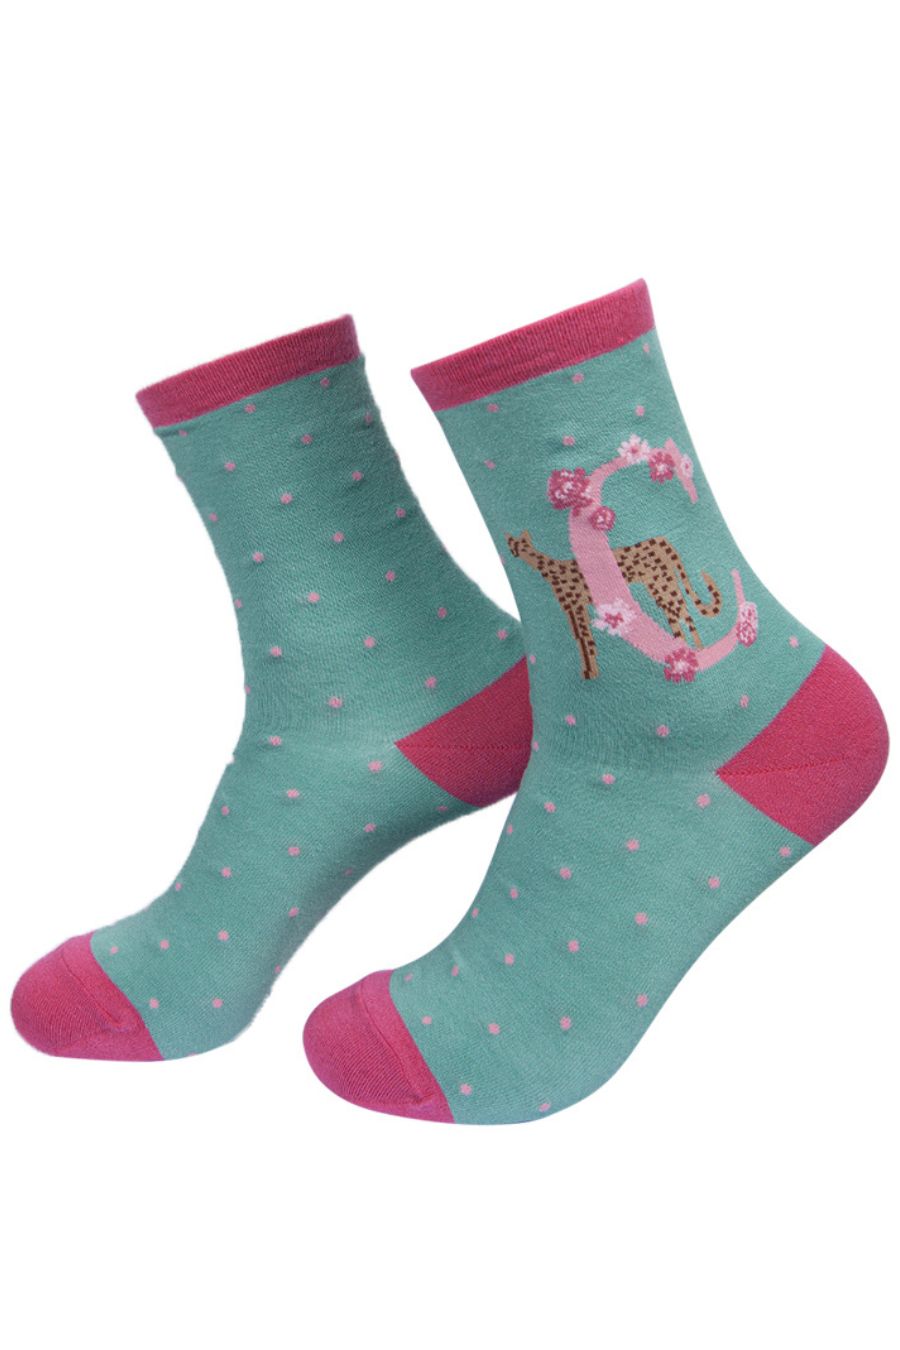 green, pink bamboo socks with a letter C and a cheetah